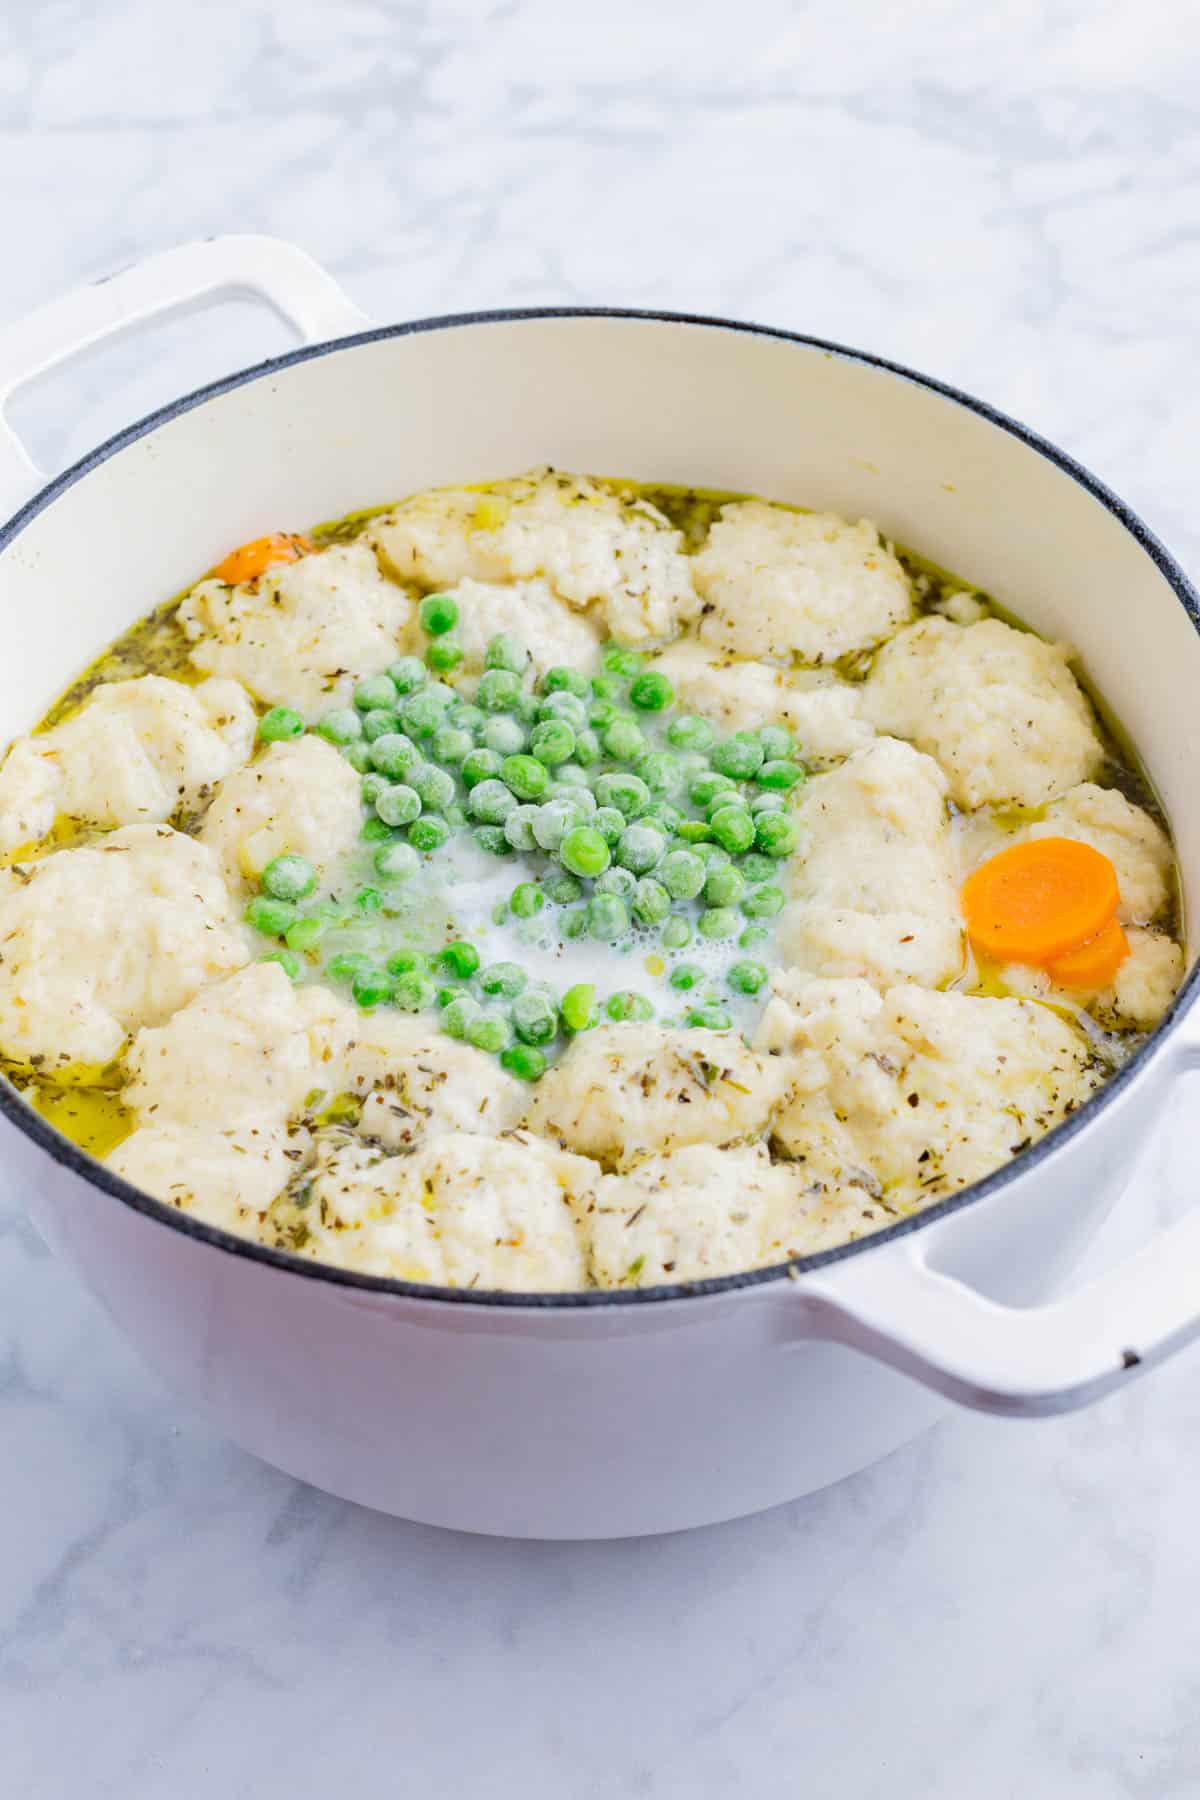 Dumplings, peas, and milk are added to the soup base to cook.